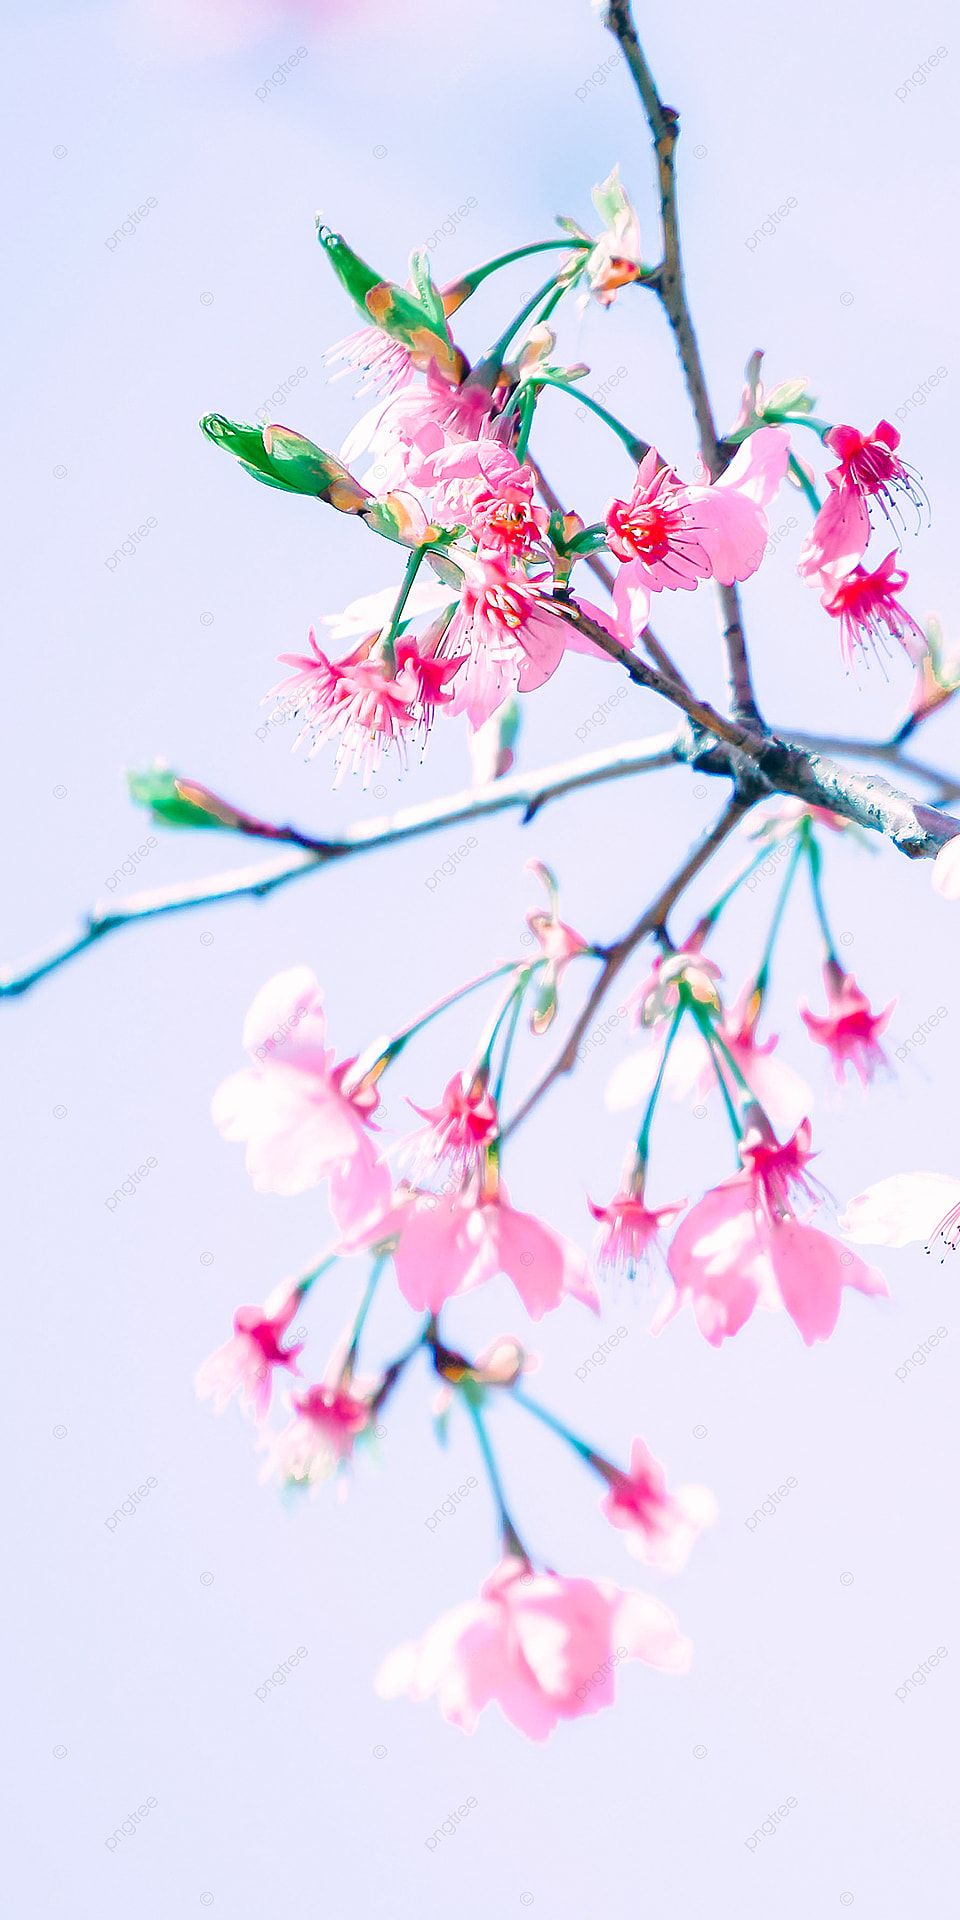 Green Tree Pink Flowers Cherry Blossom Mobile Wallpaper, Background, Decorative Shading, Cute Background Image for Free Download